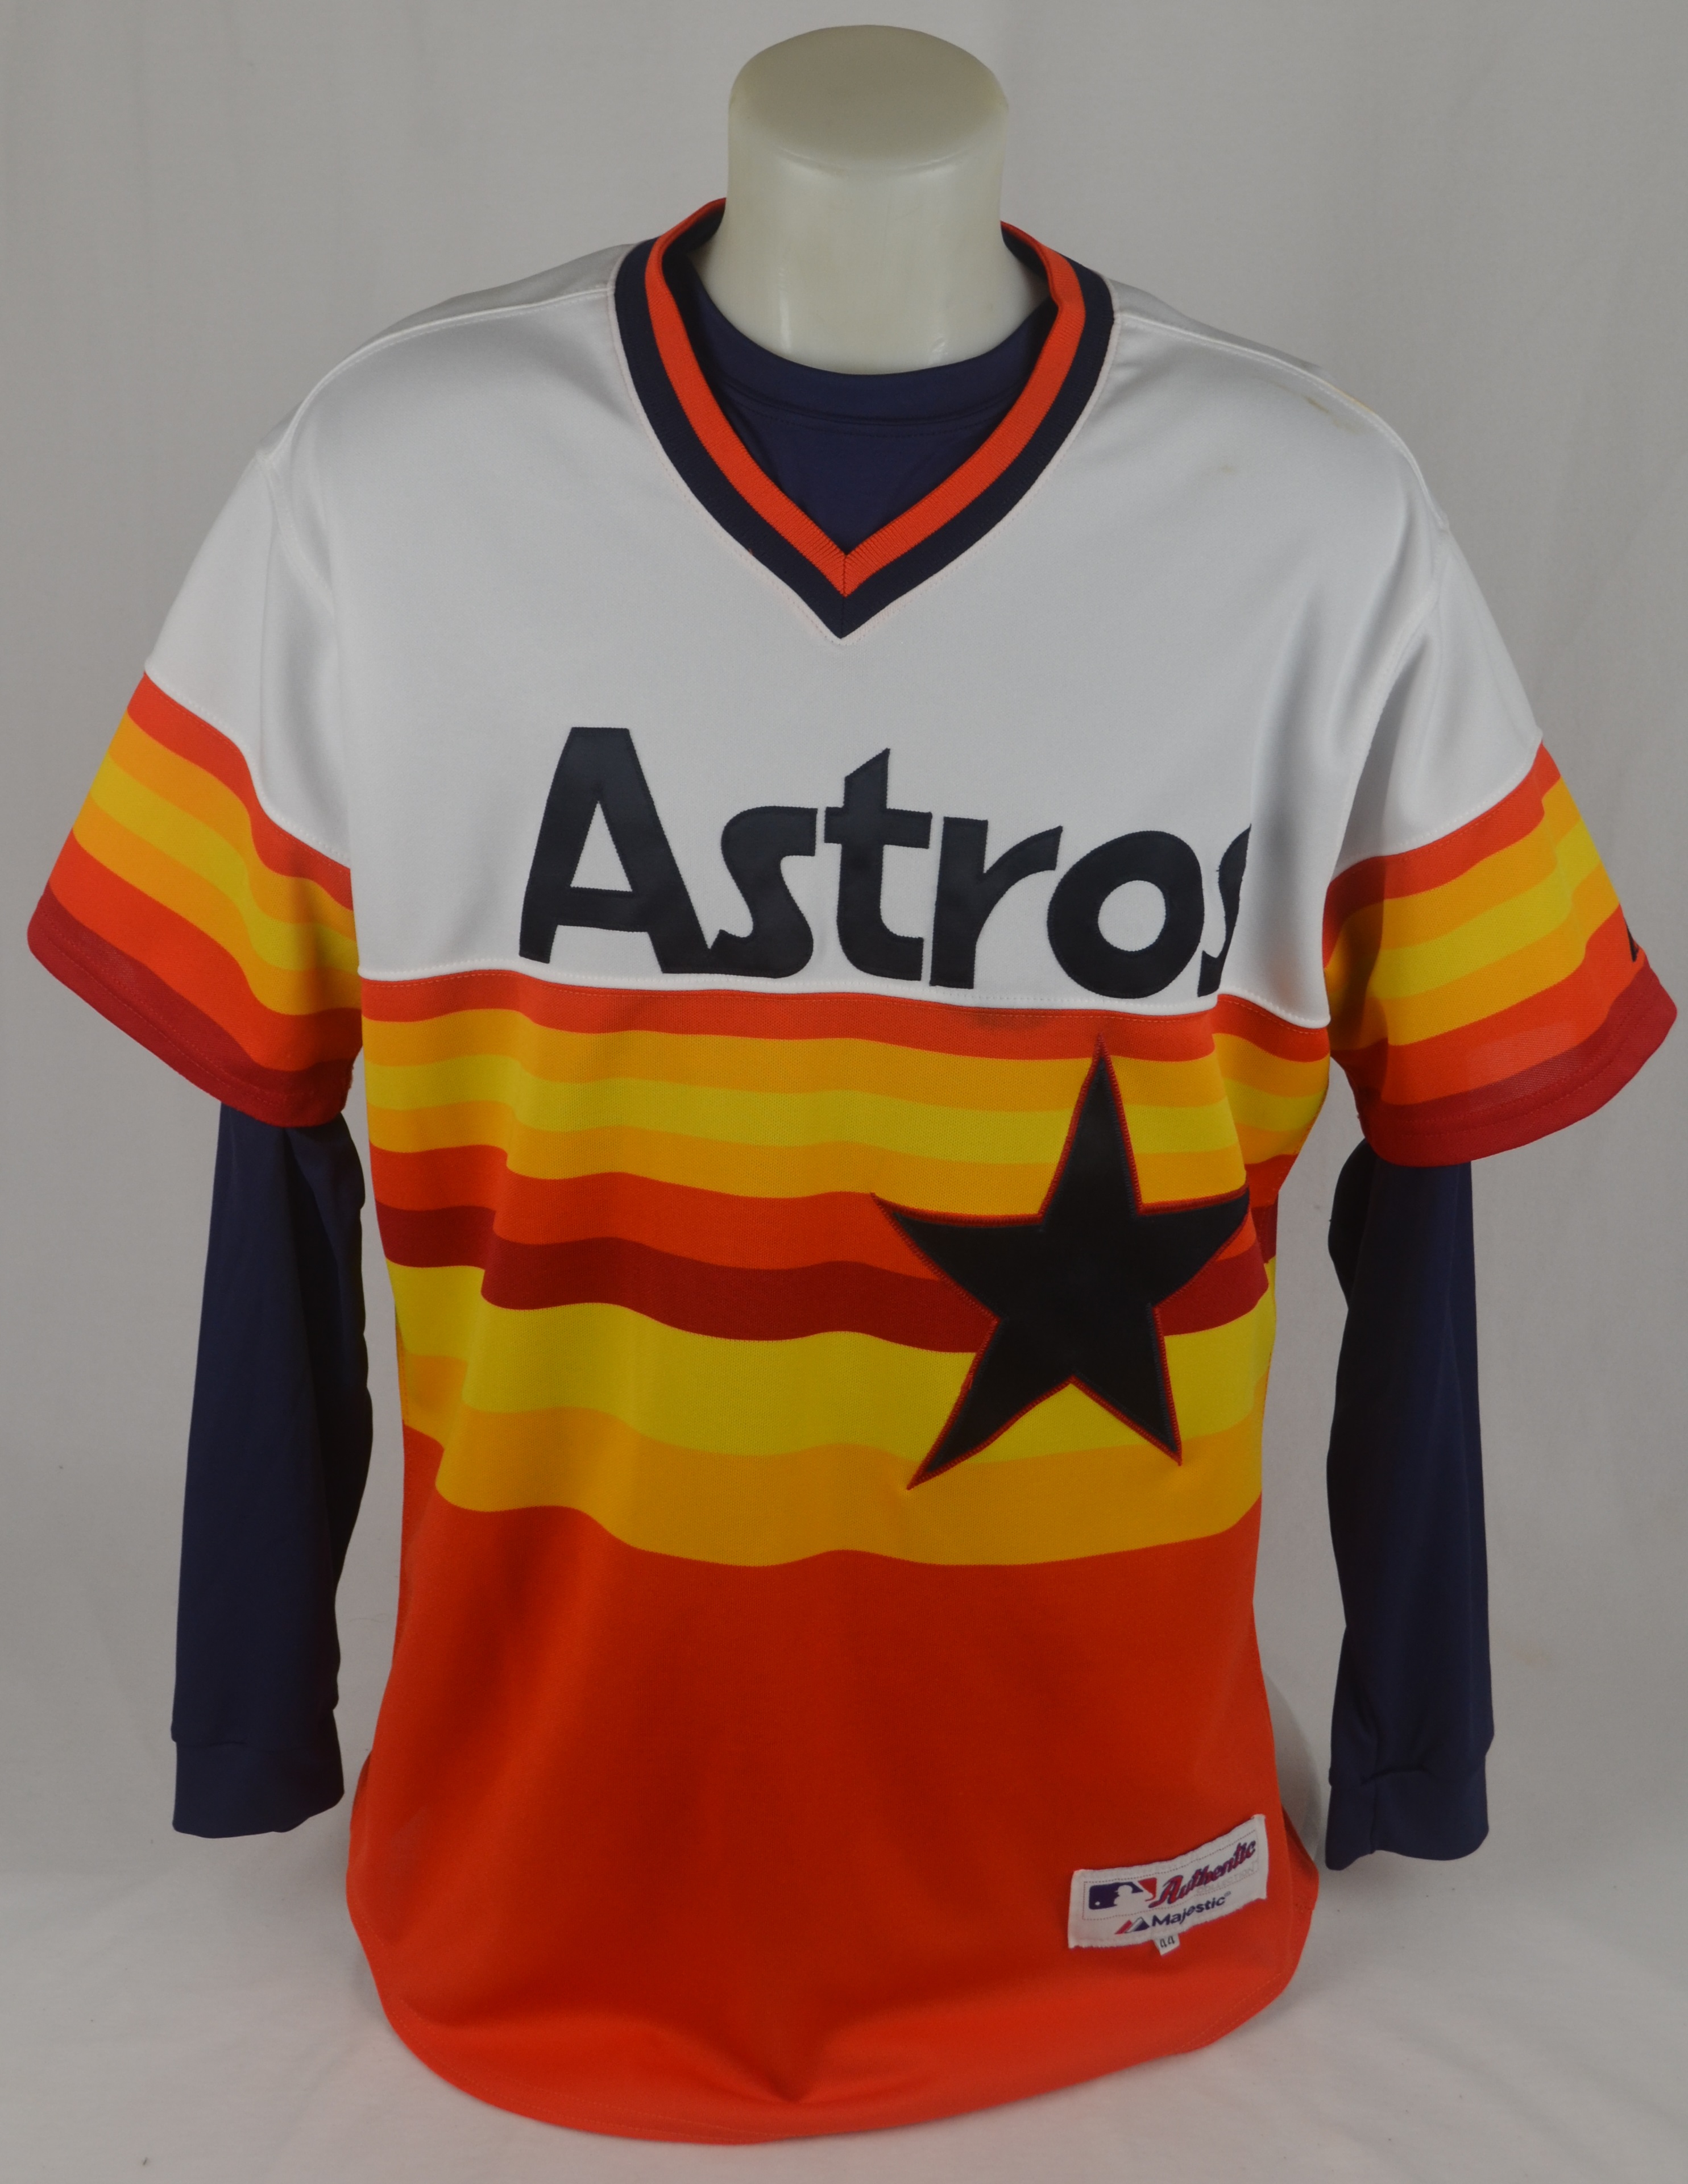 Late 1980s Early 1990s Houston Astros # Game Used Navy Jacket L DP32897